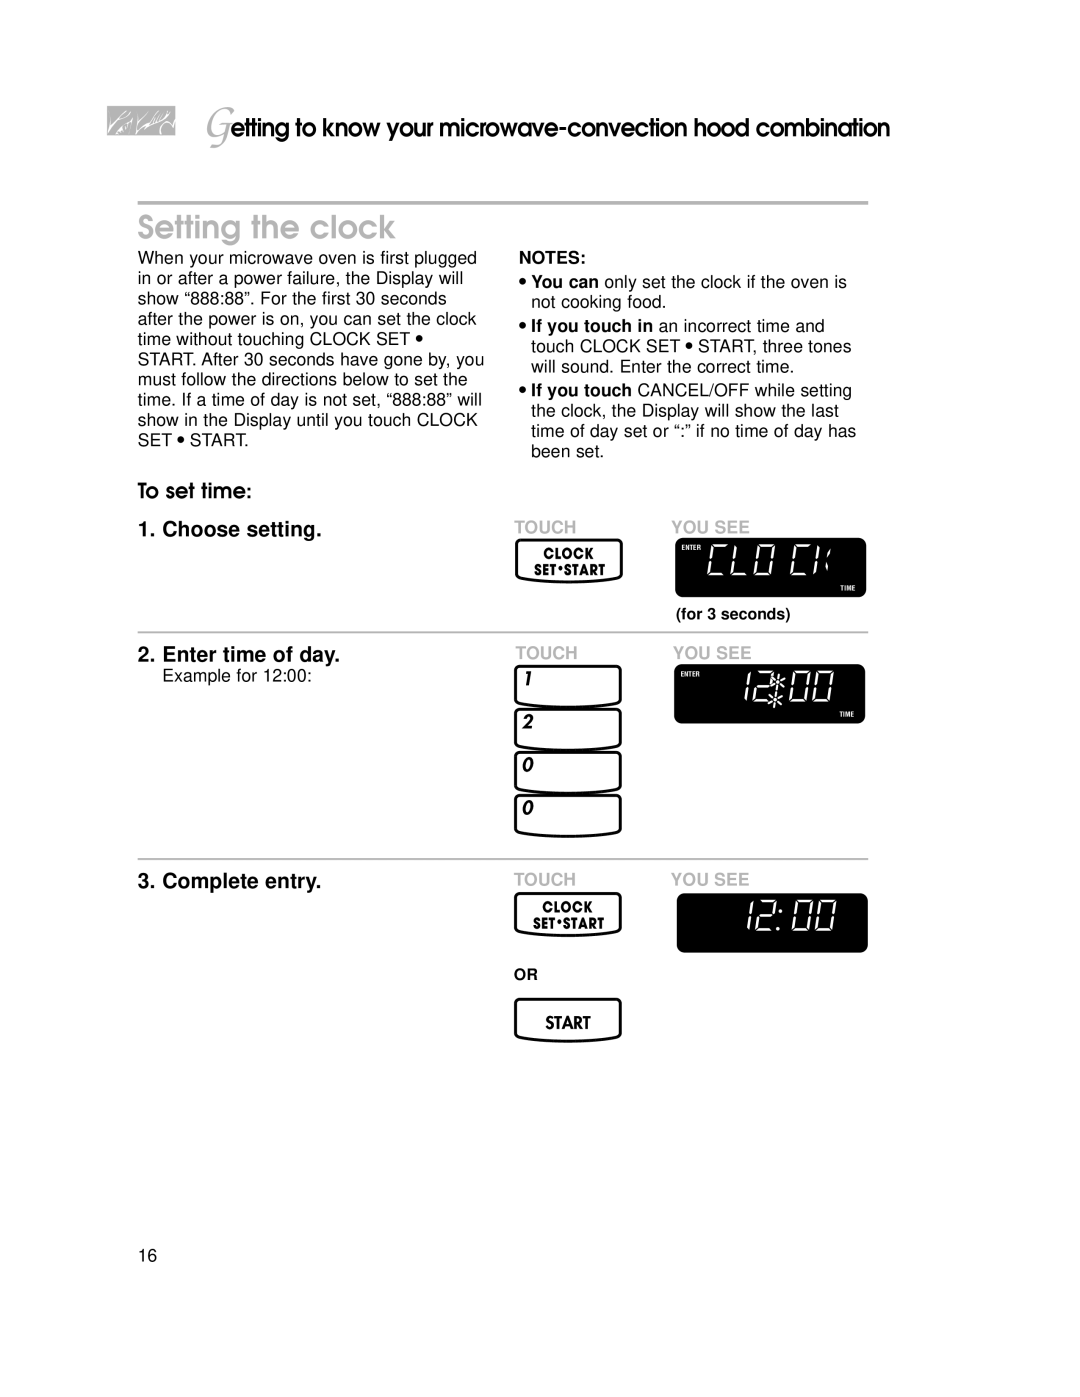 KitchenAid 4359916, YKHMC107E warranty Setting the clock, To set time, Choose setting, Enter time of day, Complete entry 